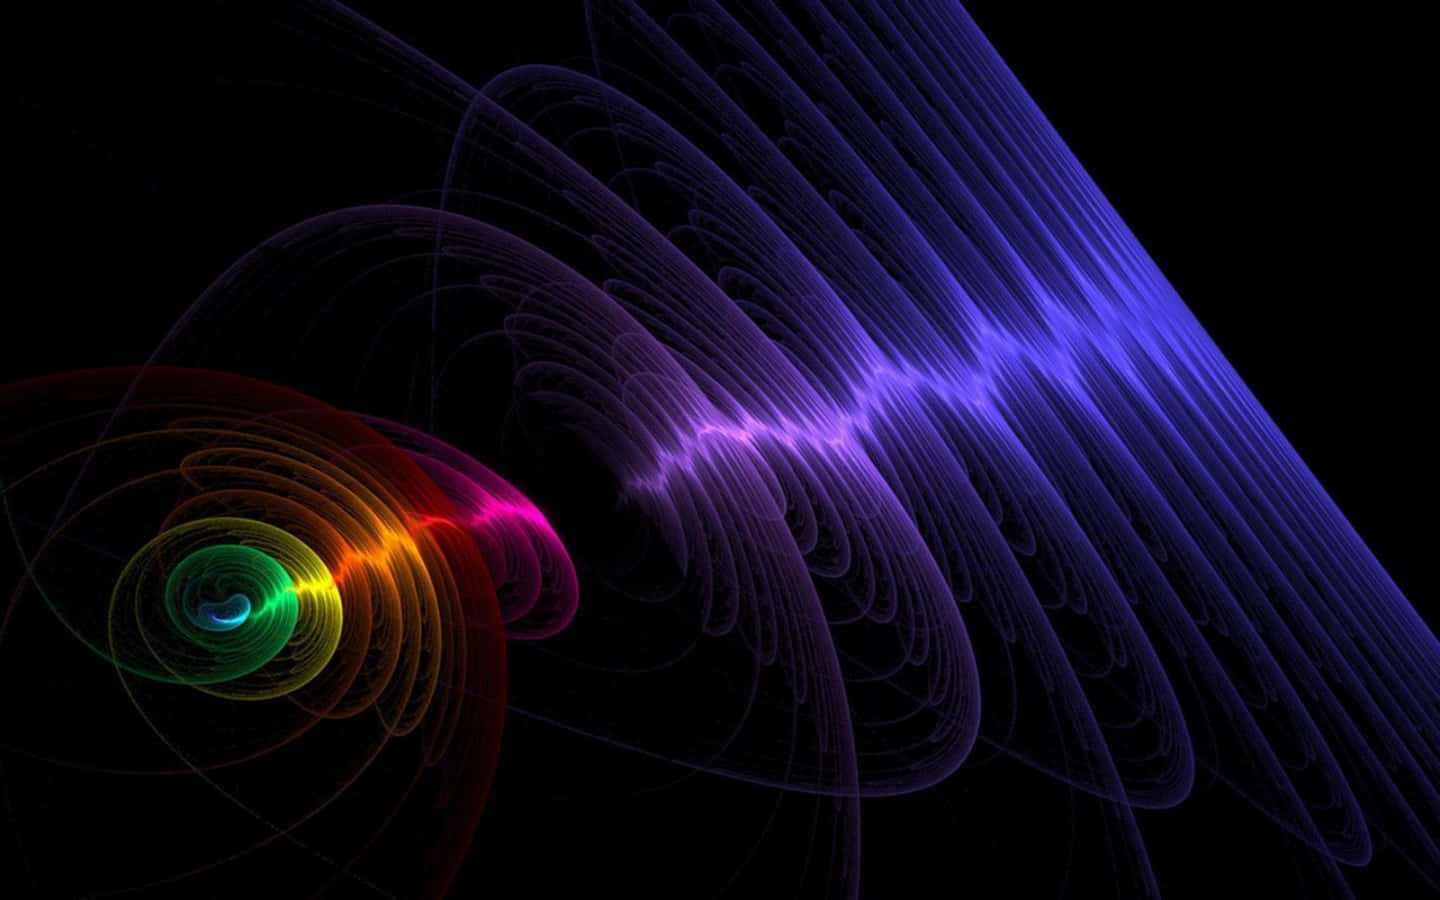 A Colorful Abstract Image Of A Spiral